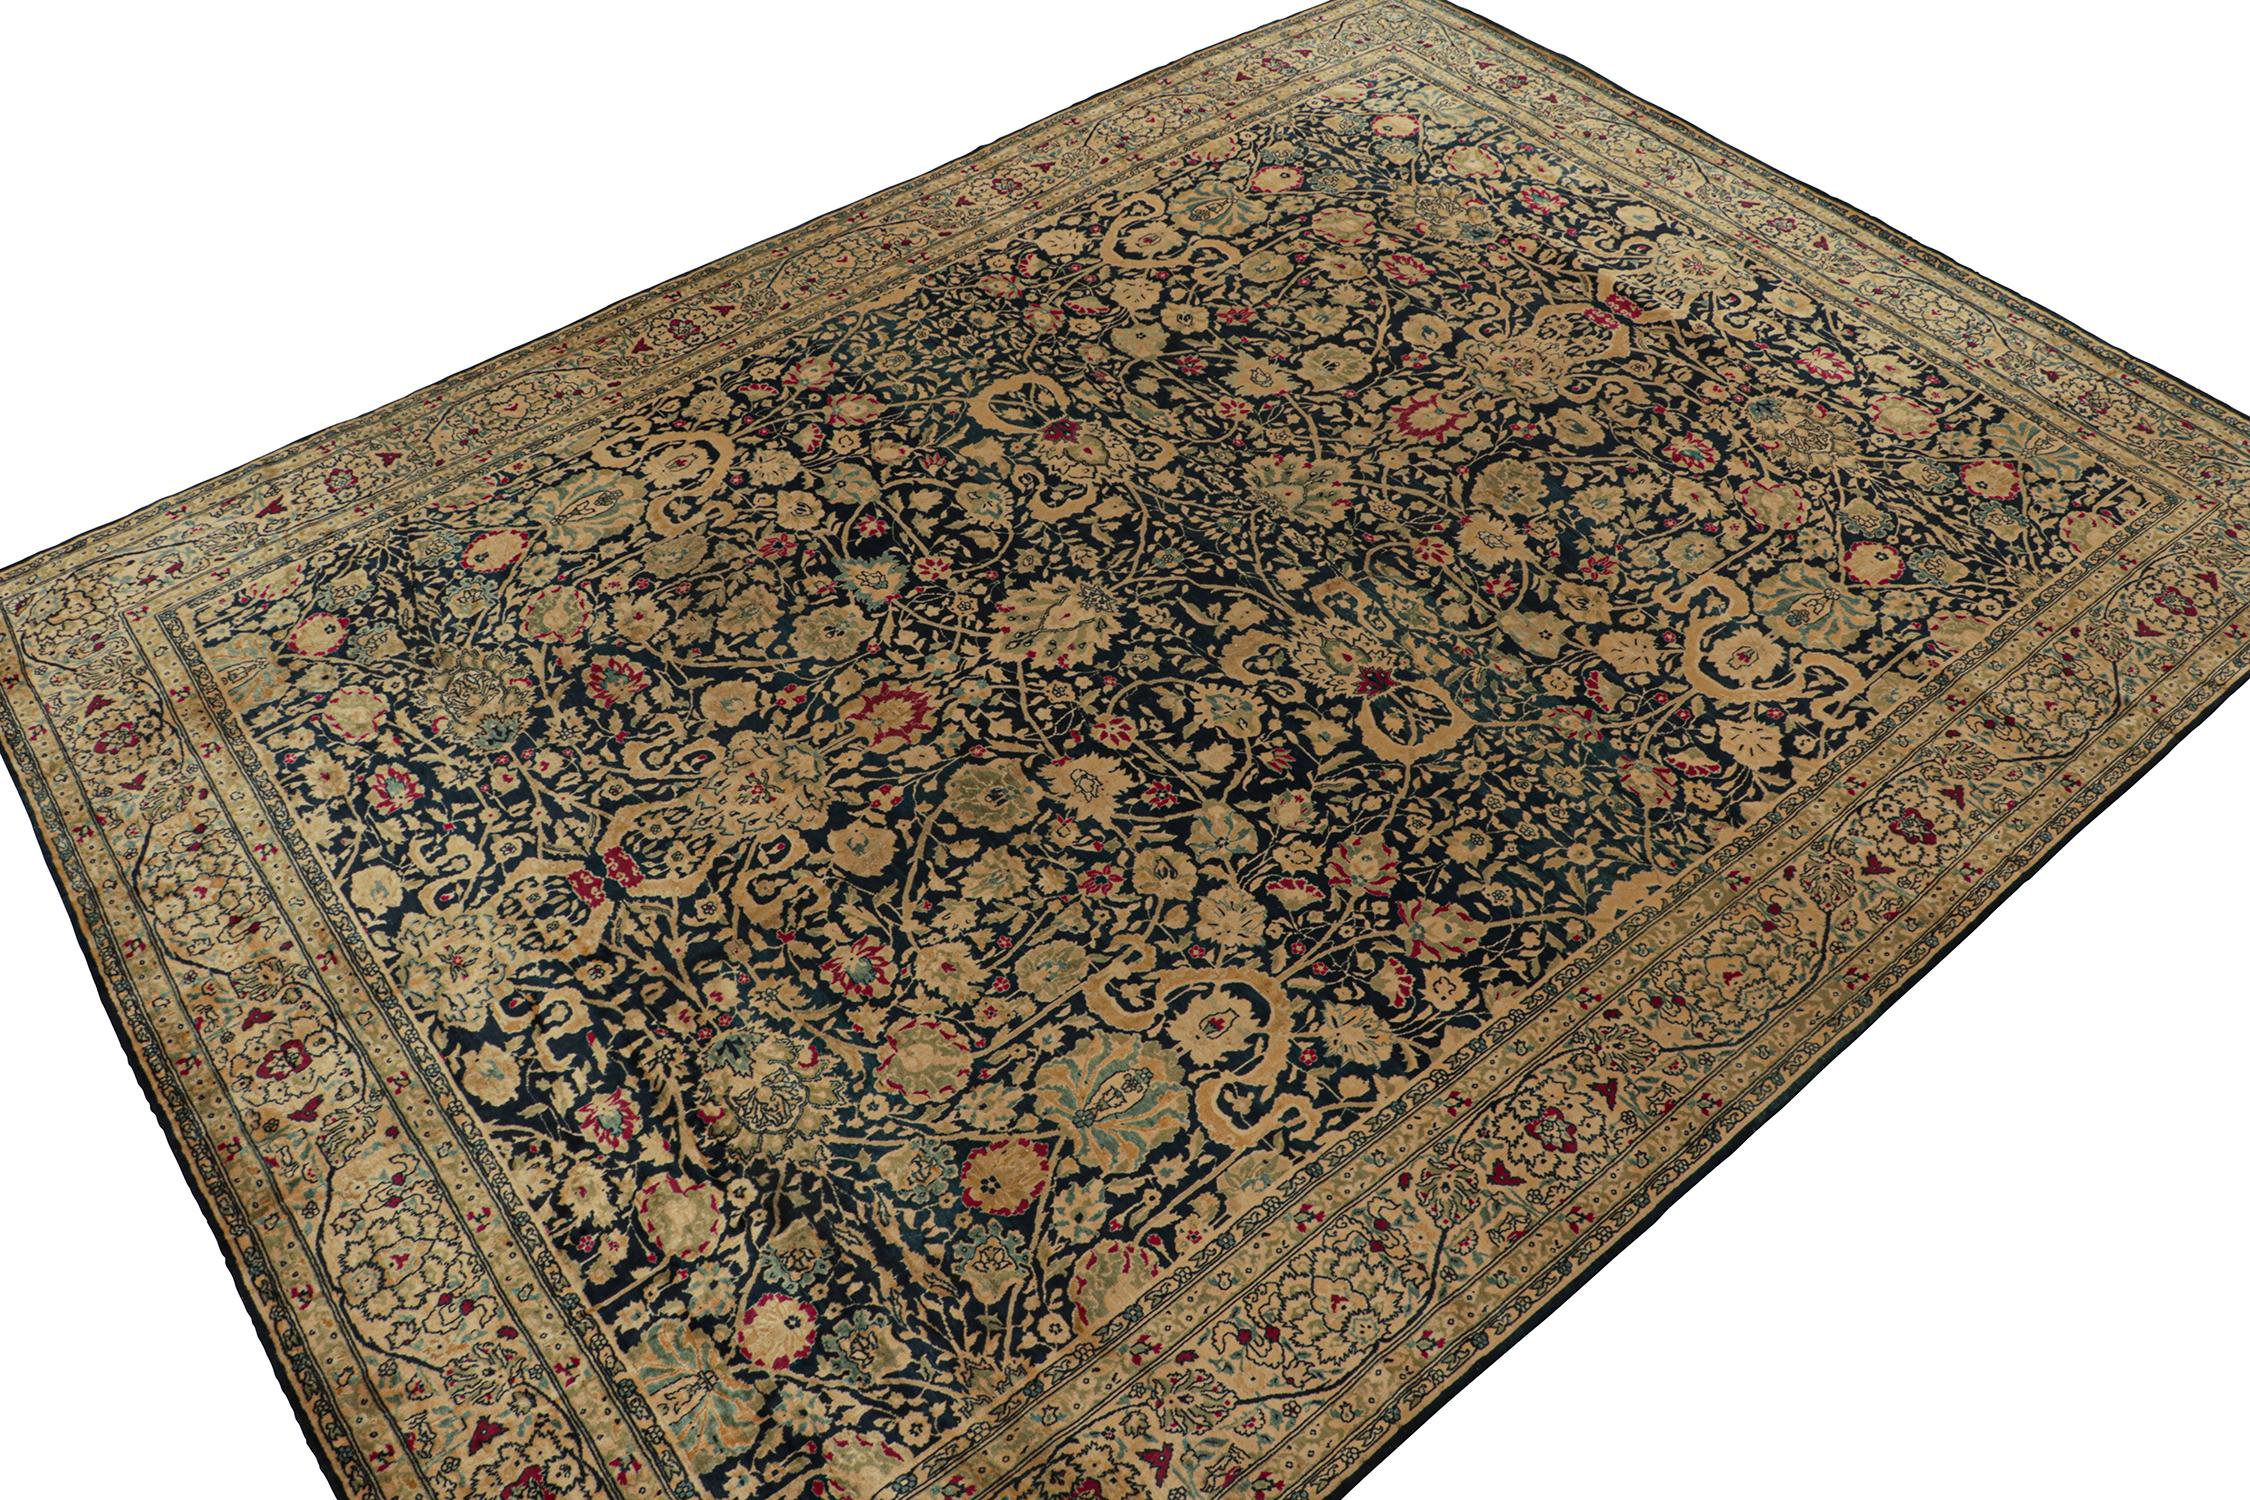 From Rug & Kilim’s classic selections, an 11x15 antique Agra rug hand-knotted in wool circa 1890-1900. This well-drawn piece recaptures elaborate Shahrestan sensibilities, with floral patterns in beige-brown, blue, green and gold with red